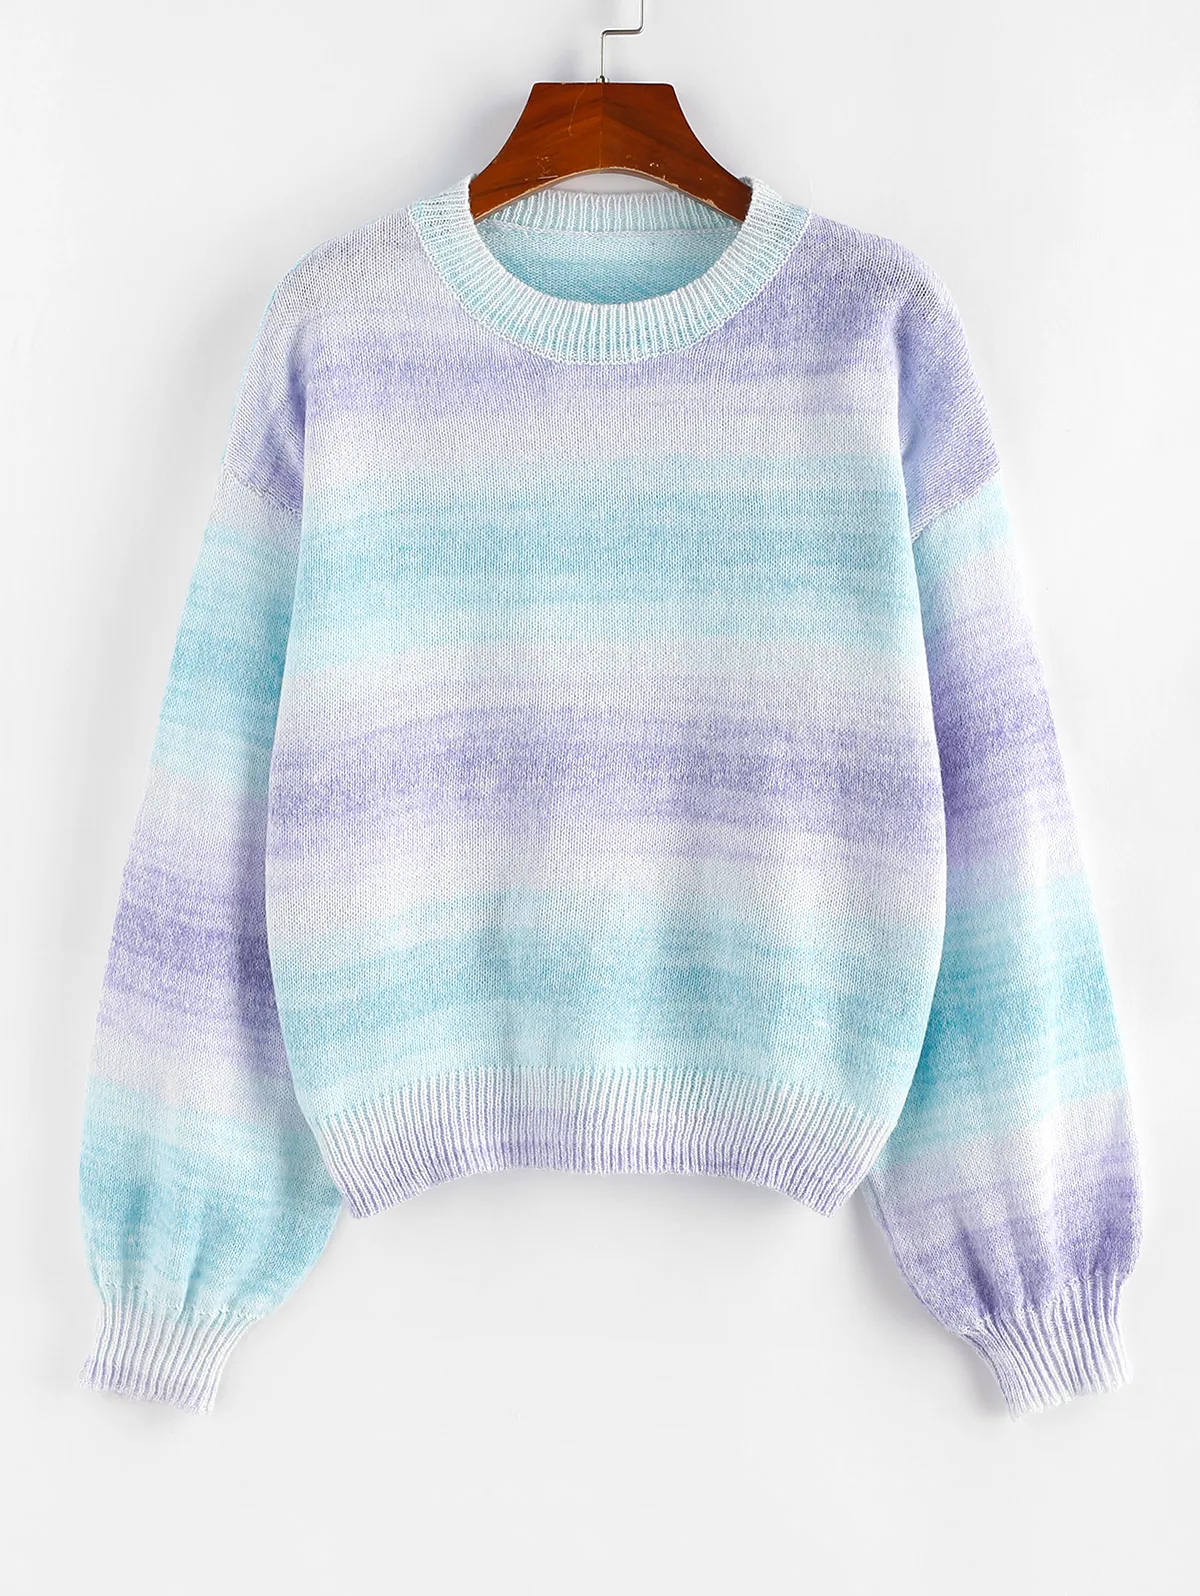 

ZAFUL Ombre Tie Dye Drop Shoulder Sweater Women Crew Neck Casual Jumper Spring Autumn Fashion Clothes Long Sleeve Pullover